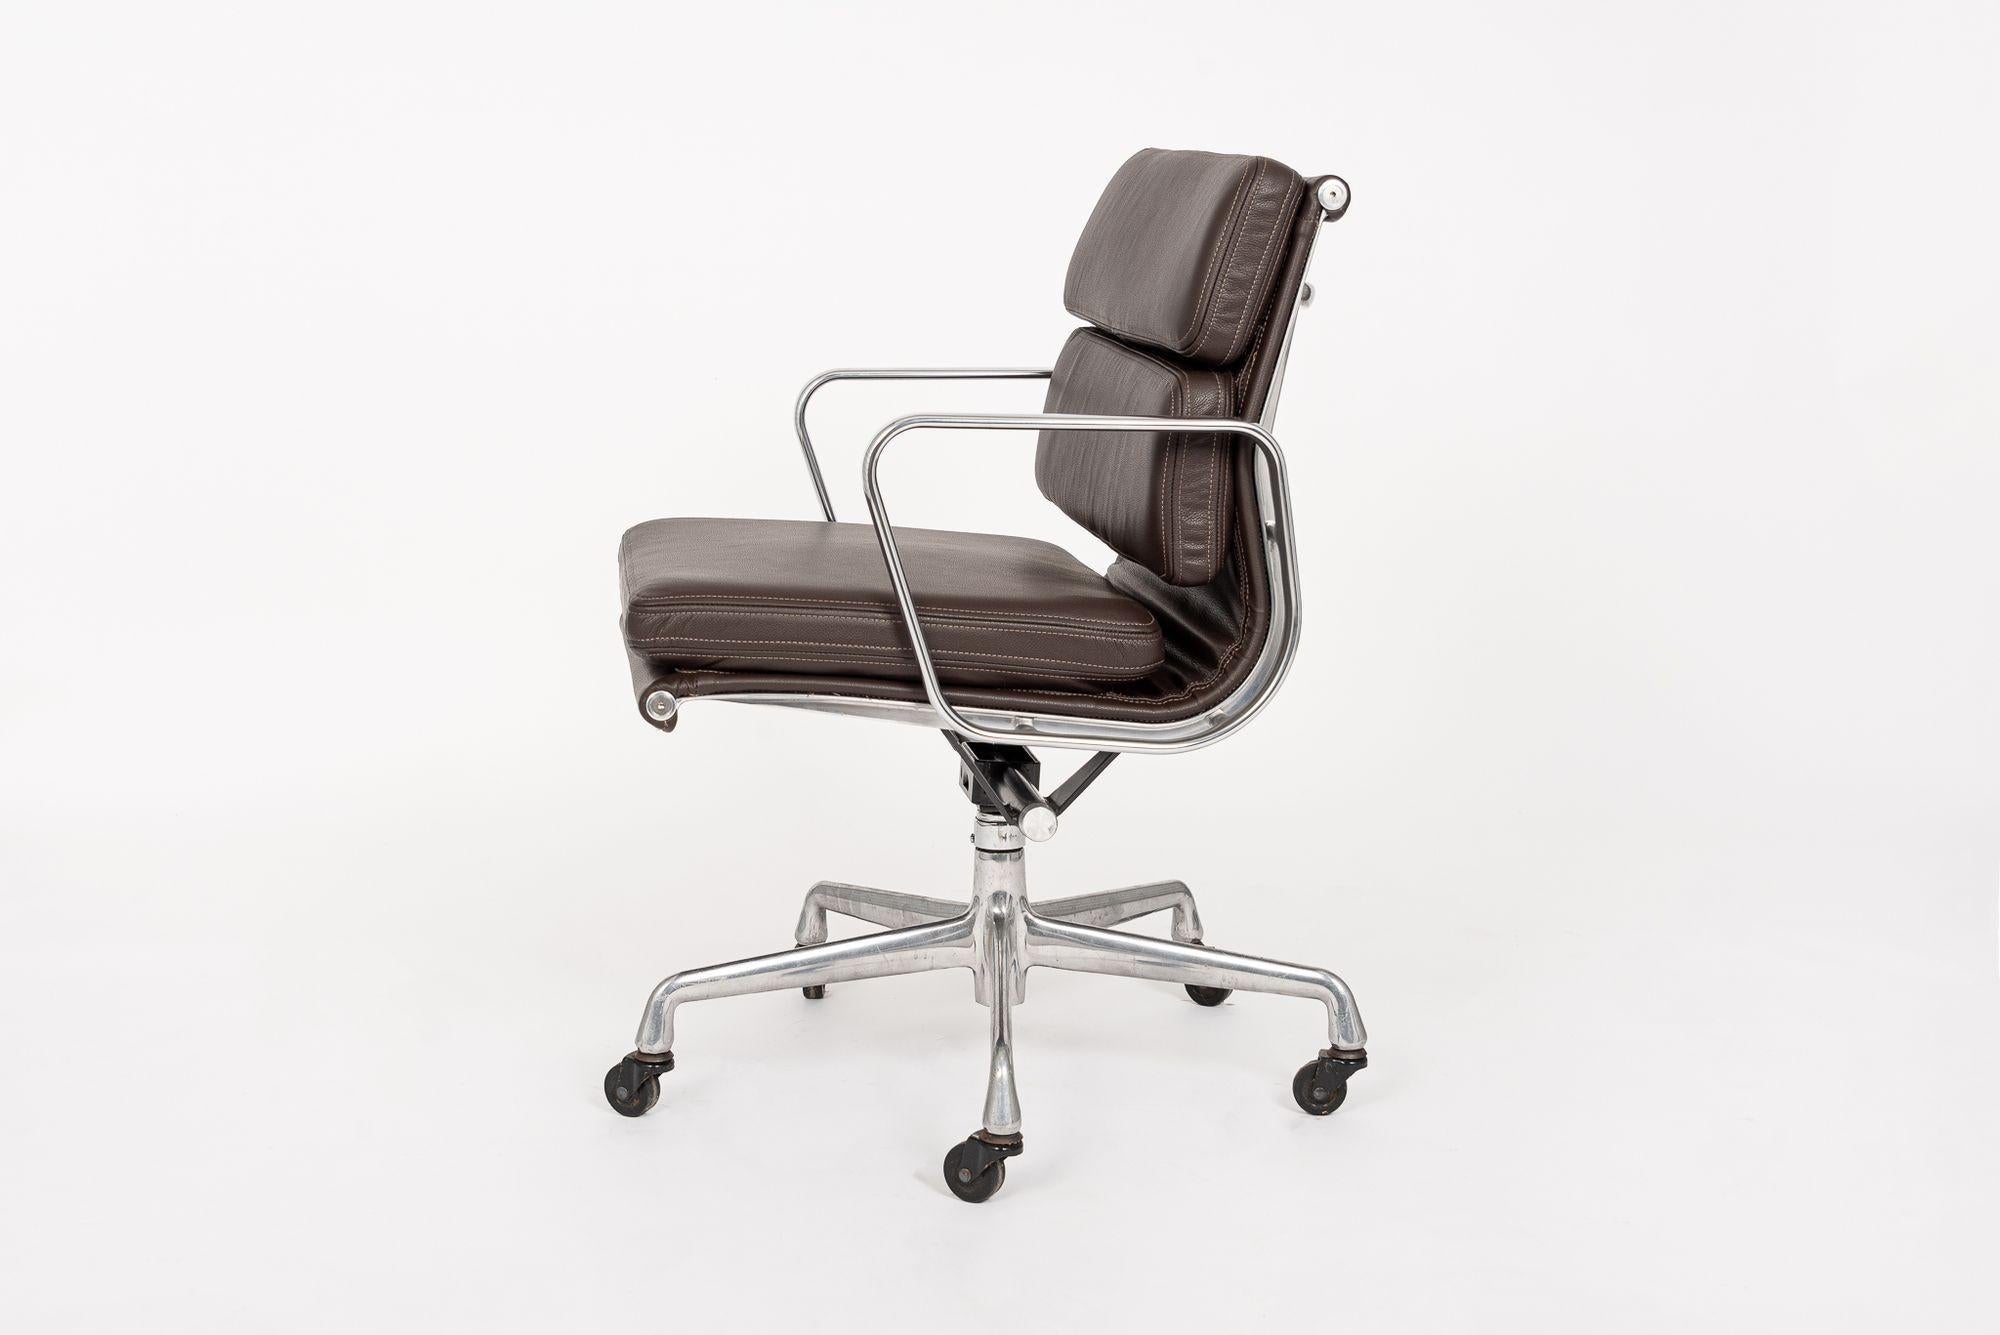 Herman Miller Eames Dark Brown Leather Desk Chair Soft Pad In Good Condition For Sale In Detroit, MI